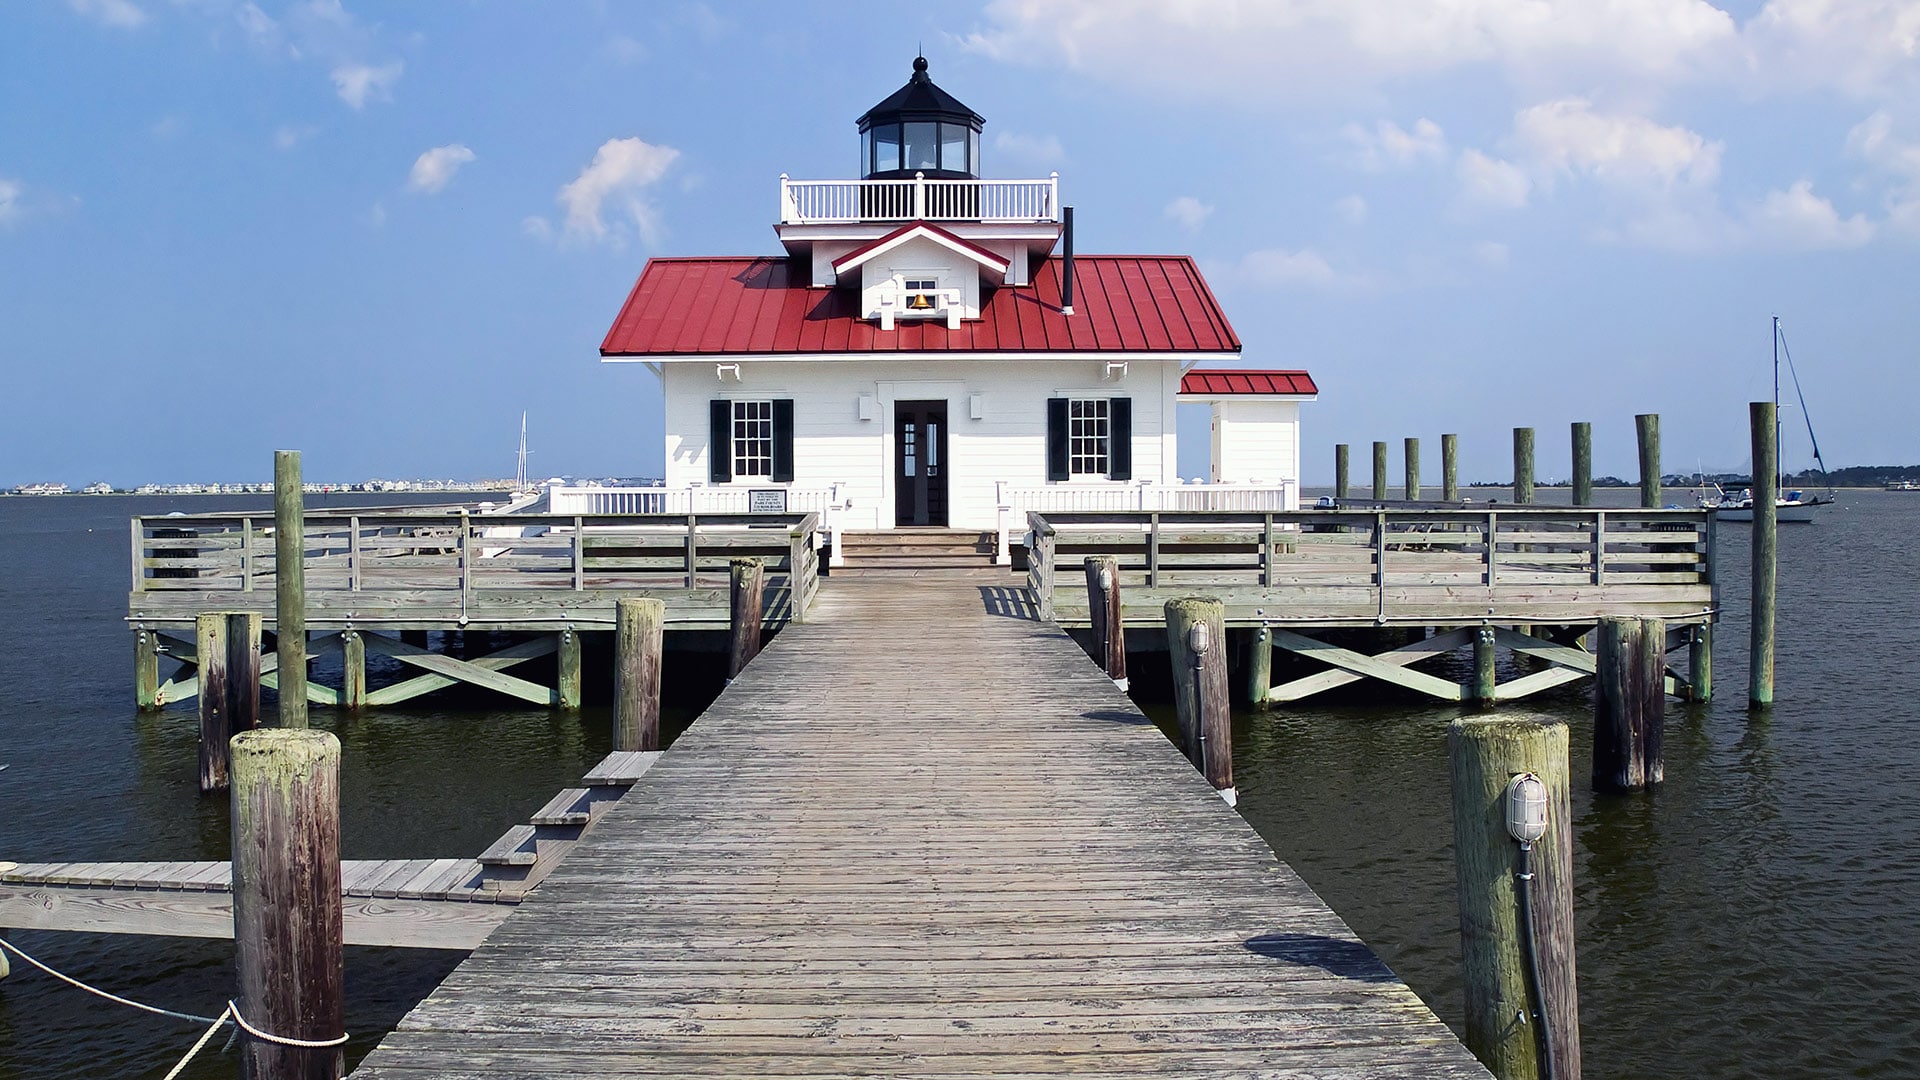 Roanoke Marshes Lighthouse during the day